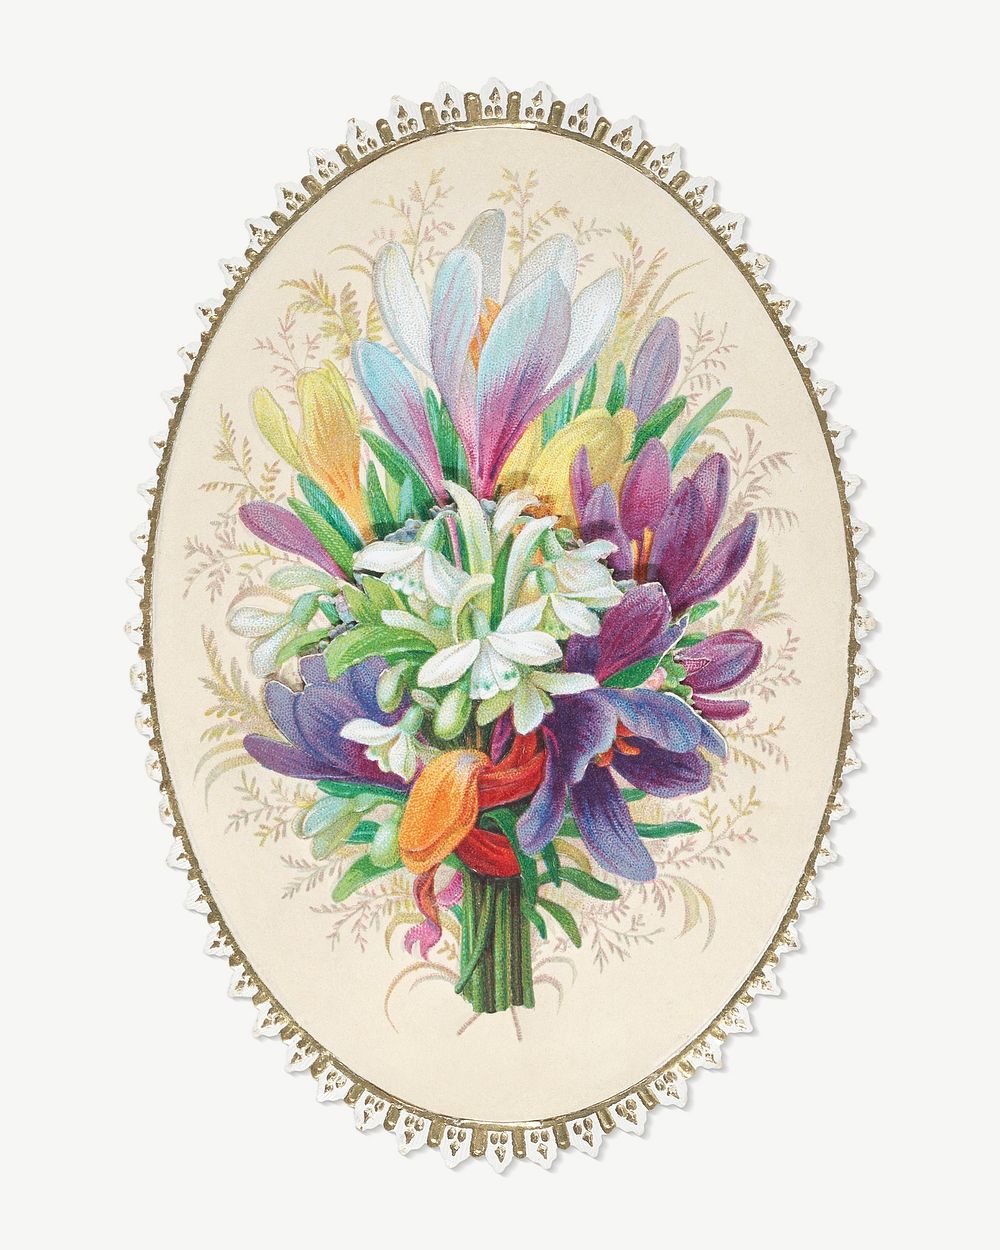 Vintage flower bouquet illustration psd. Remixed by rawpixel.